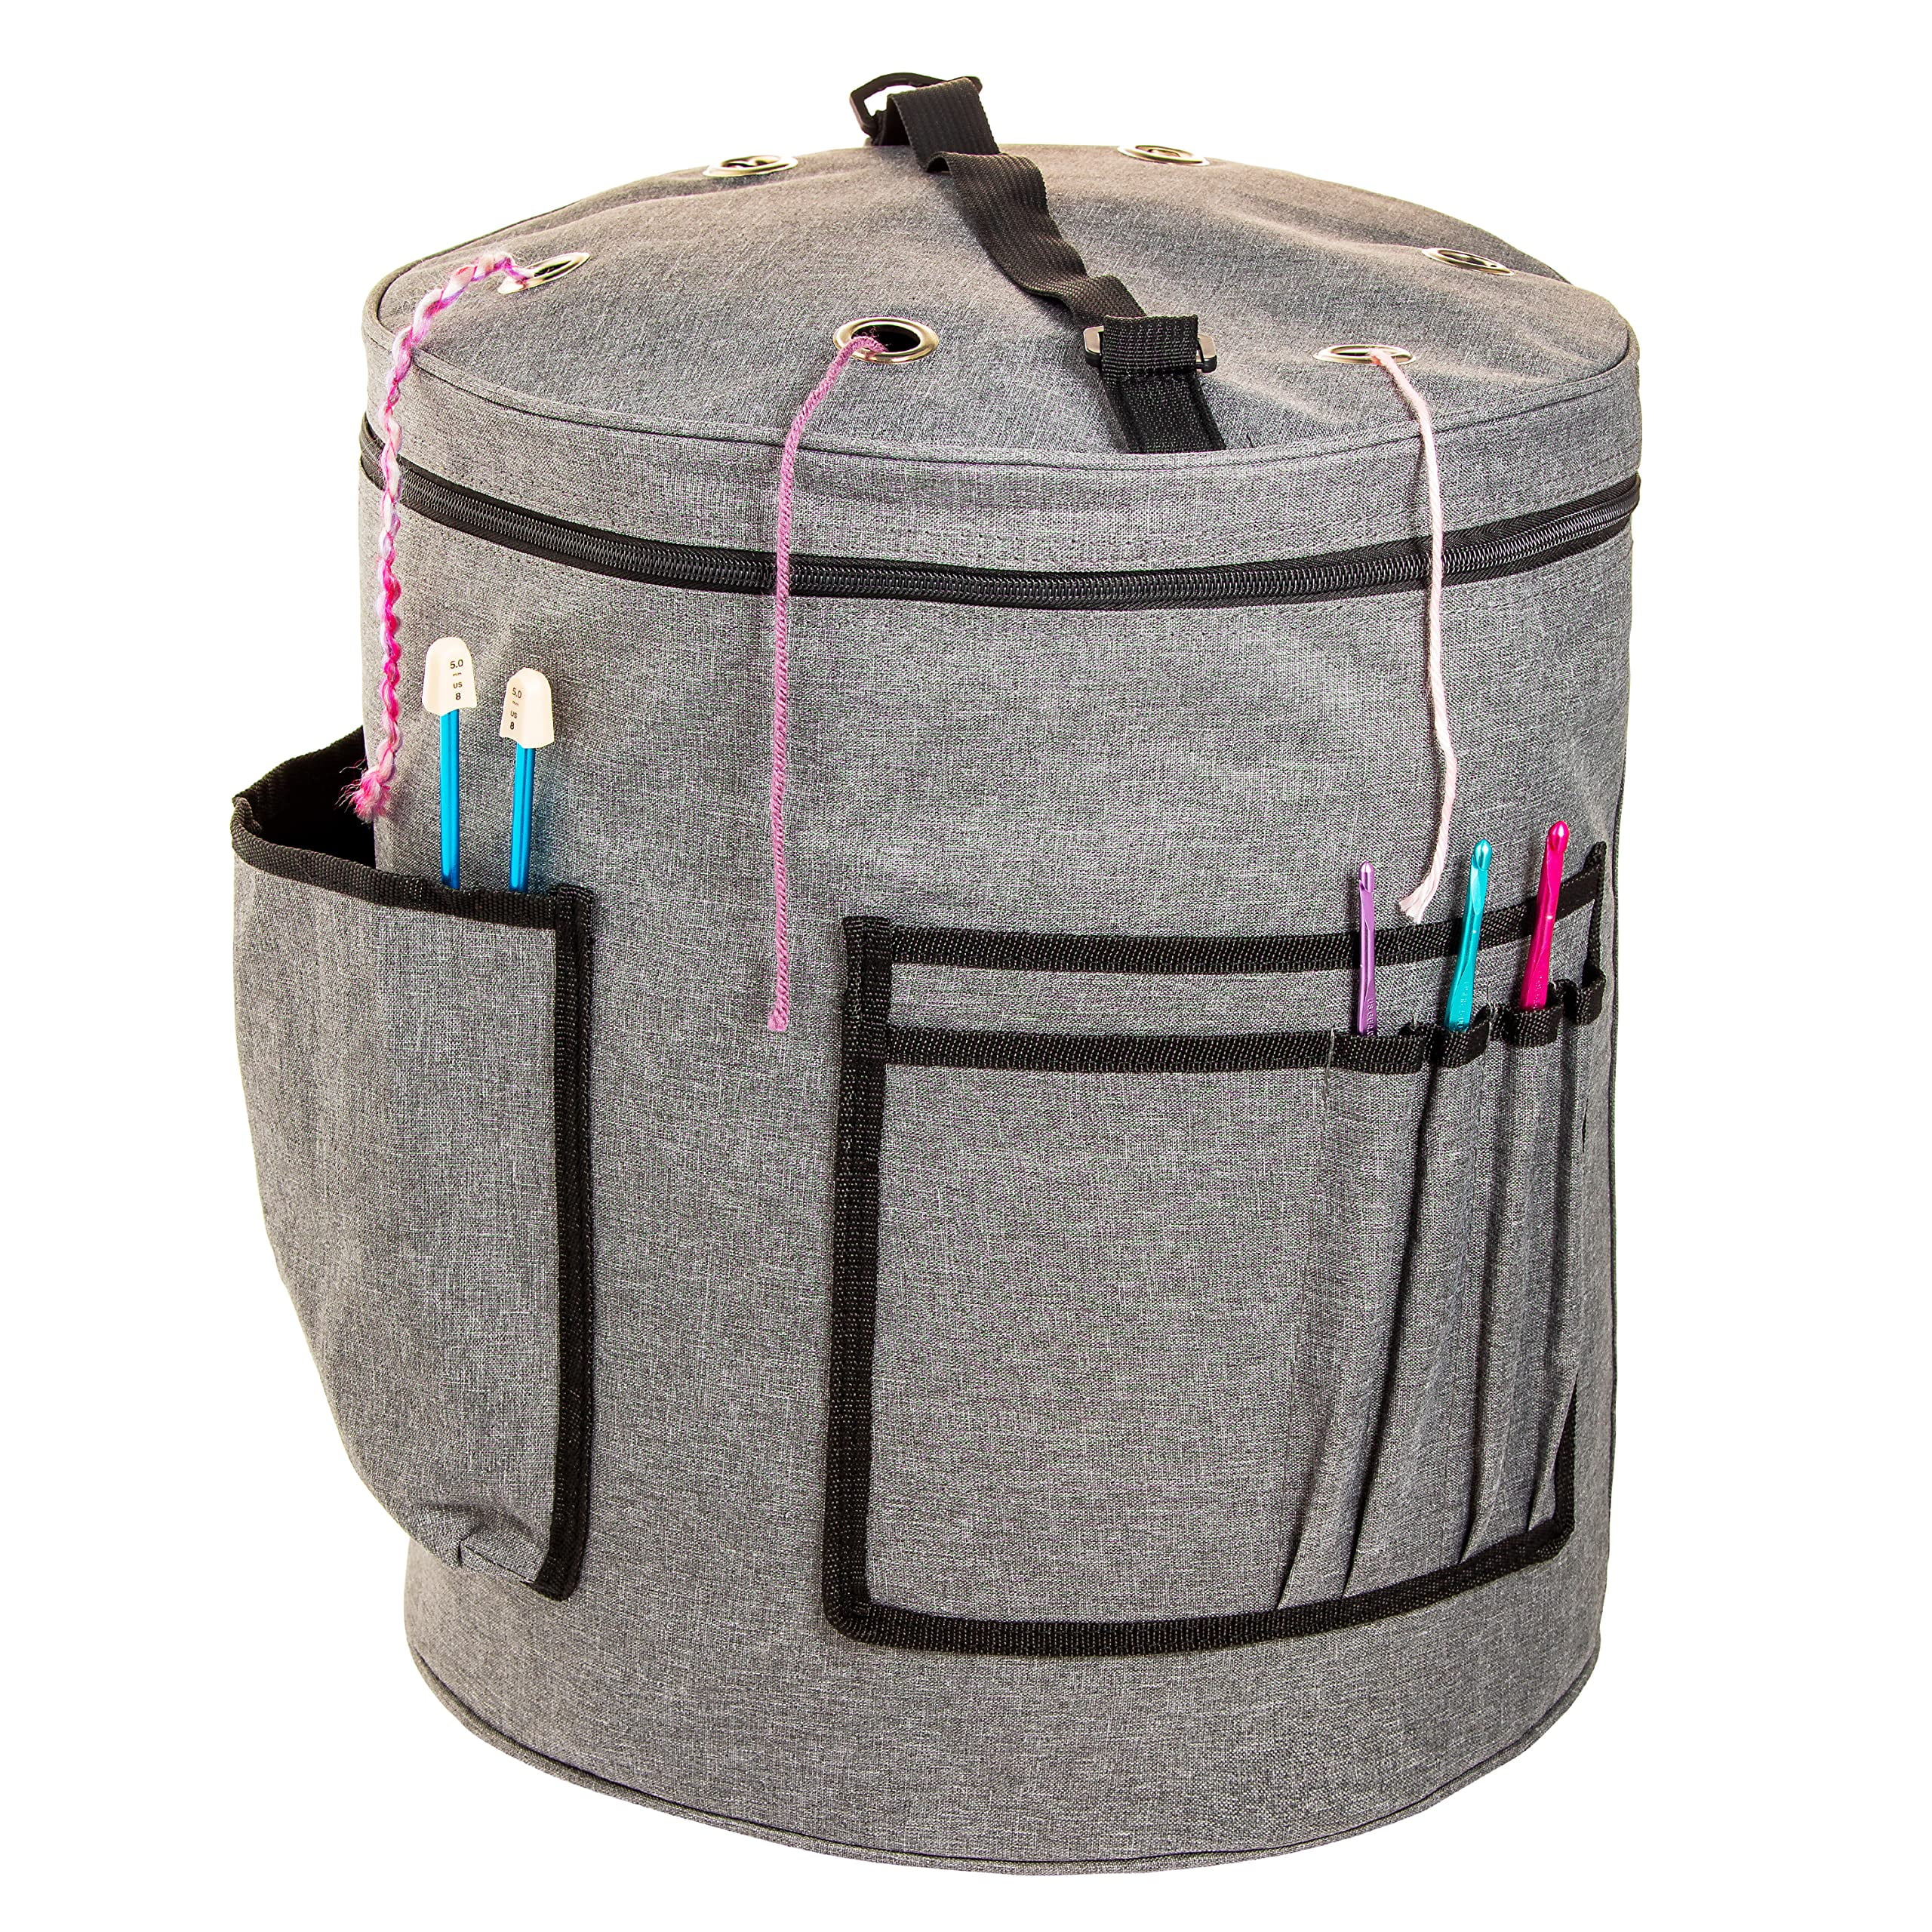 Knitting Organizer Sturdy Organic Cotton Canvas With 22 Pockets to Hold All  Your Supplies. Portable & Eco-friendly. Great Gift Idea 